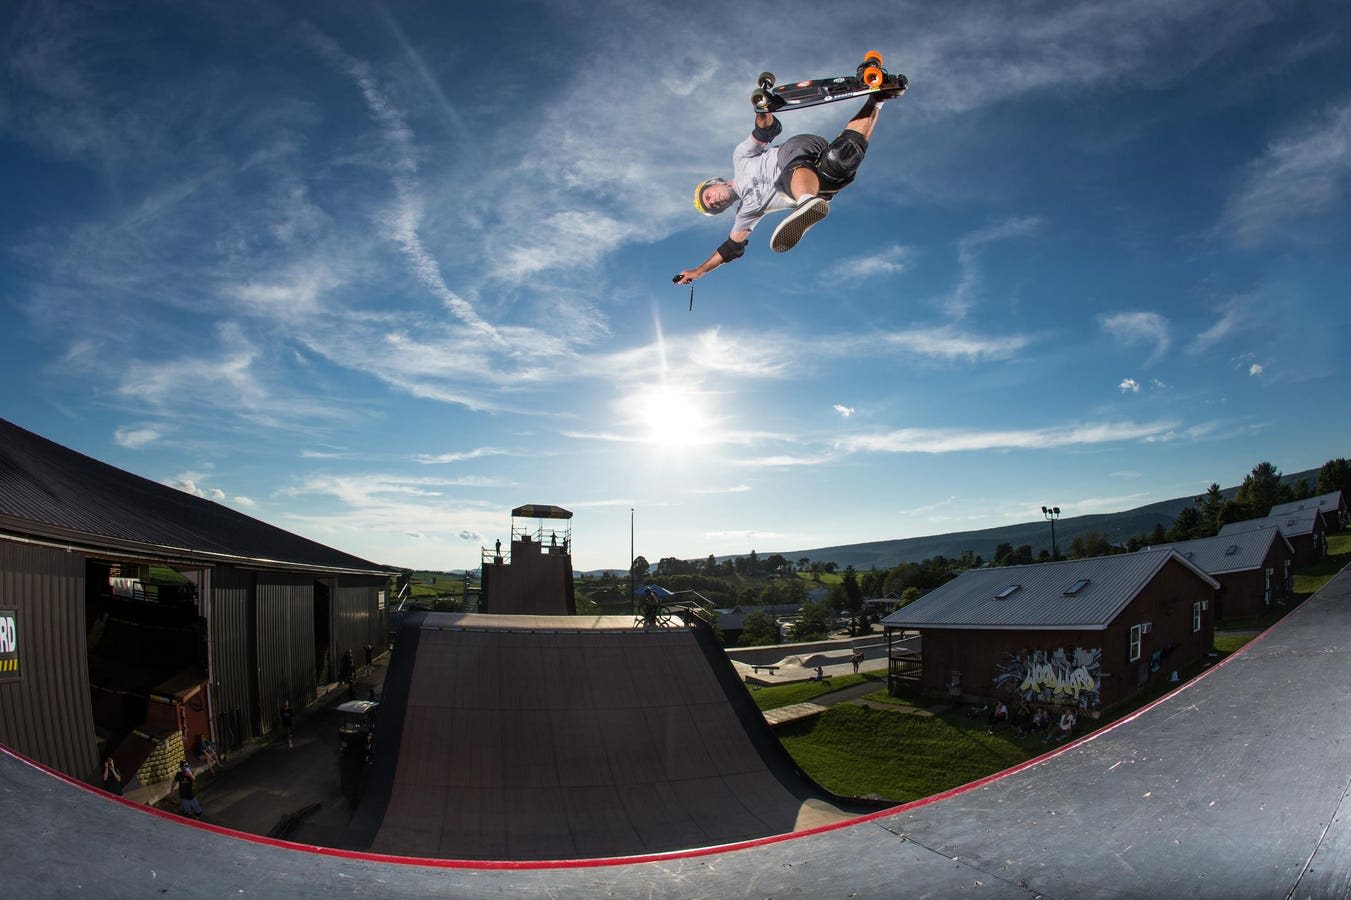 How Woodward Is Preparing Skateboard and BMX Olympians For Paris 2024